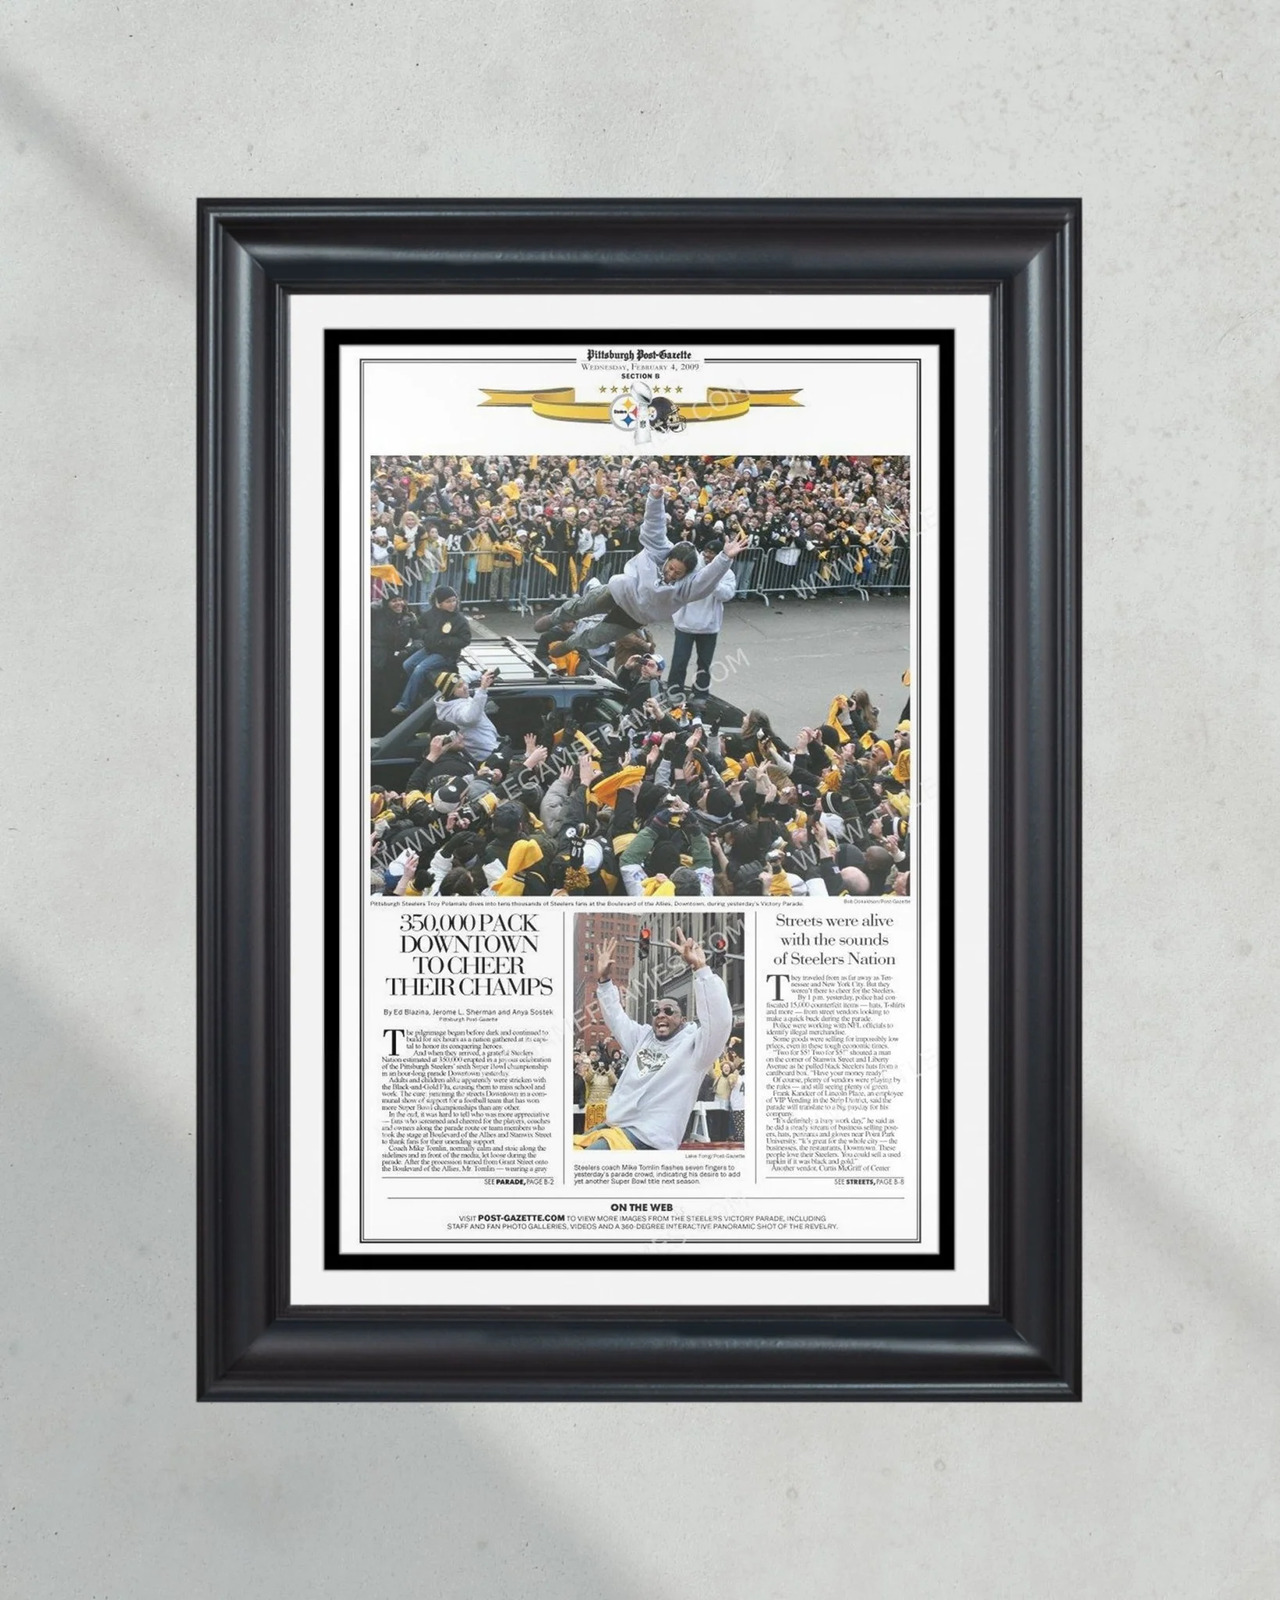 2009 Pittsburgh Steelers Parade Super Bowl Champions Framed Front Page Newspaper